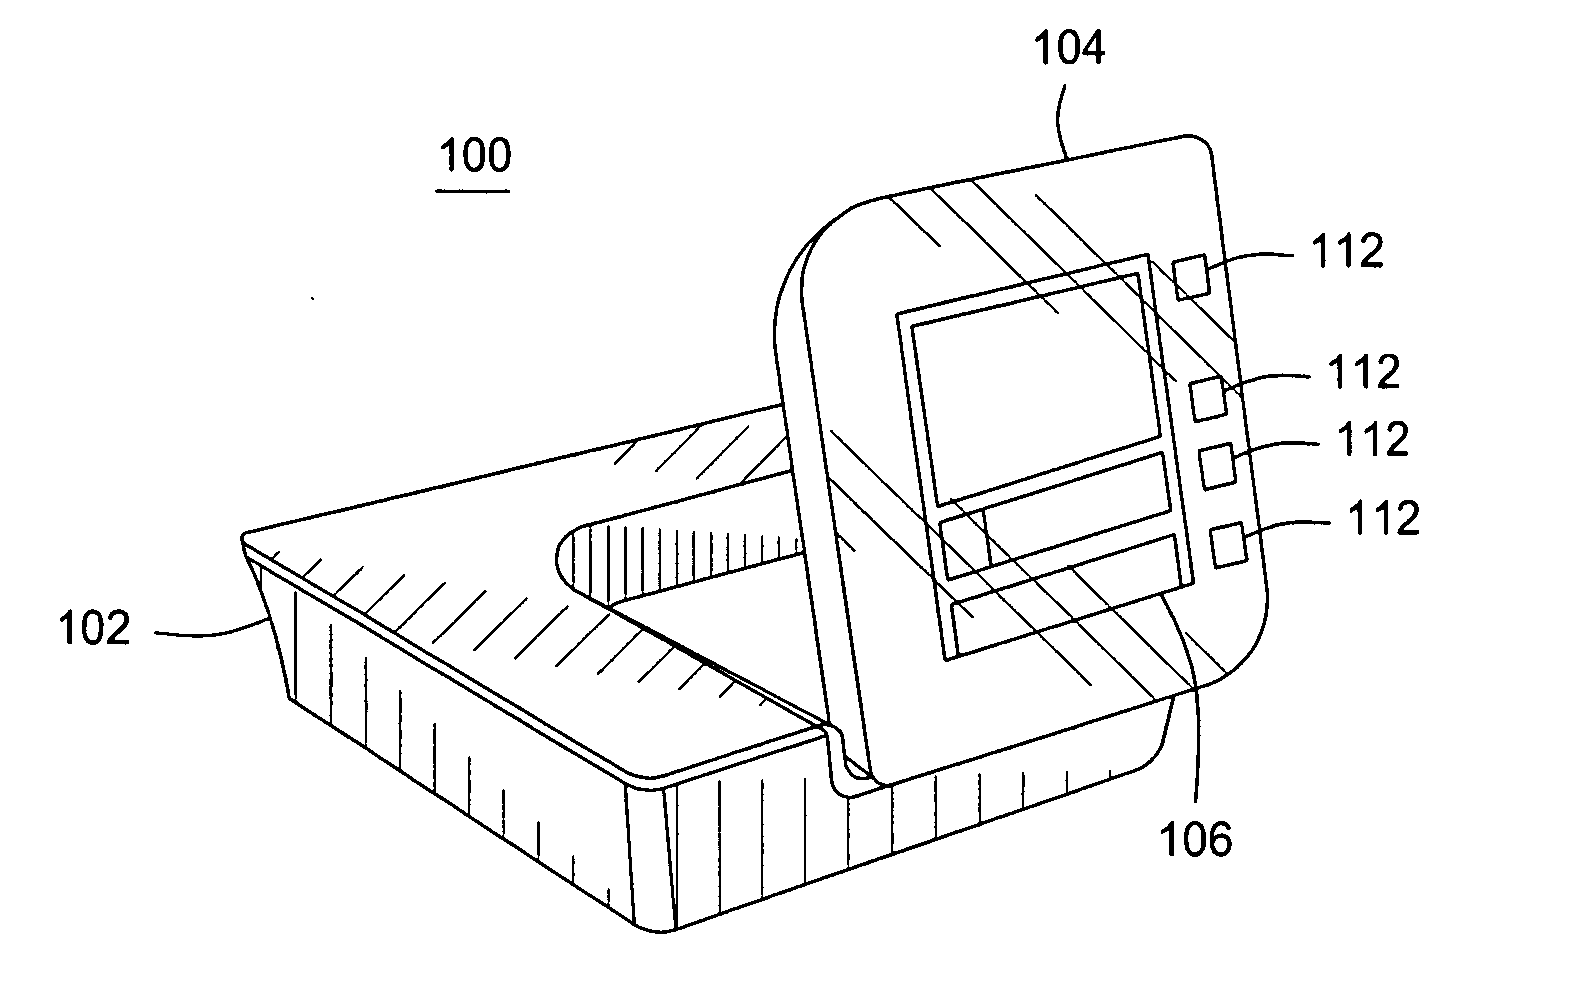 Apparatus for enhanced information display in end user devices of a packet-based communication network